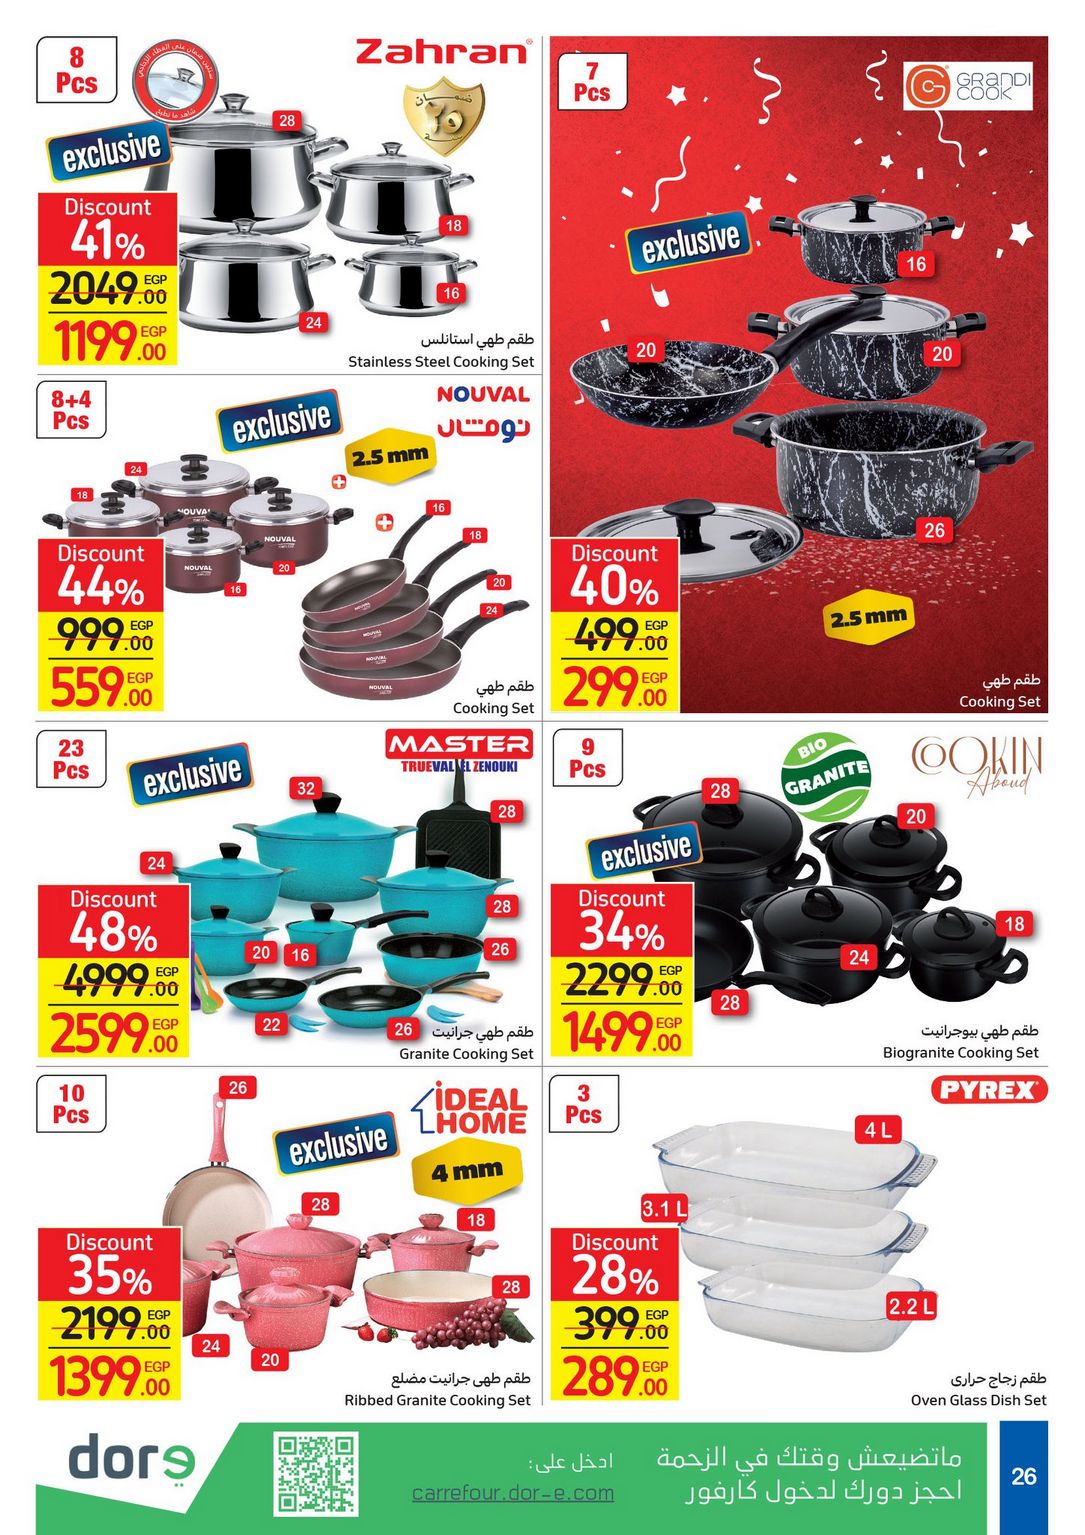 Carrefour Anniversary Offers till 18/2/2021 | Carrefour Egypt 28